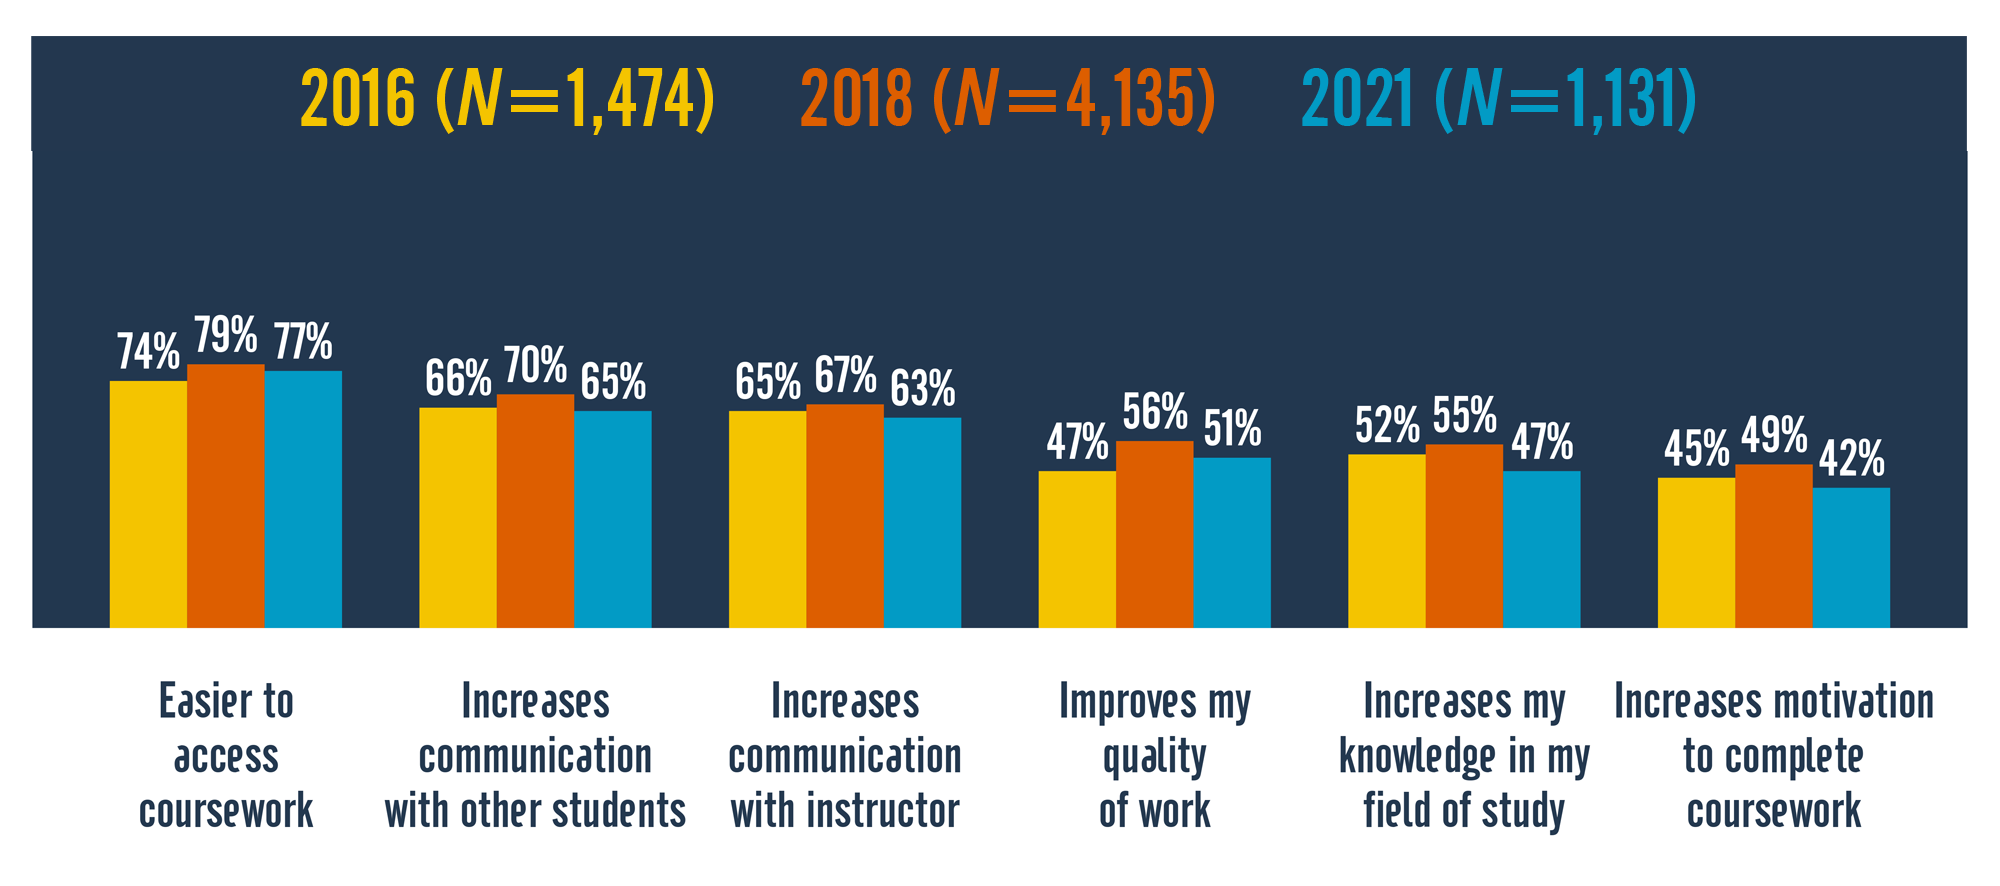 Column chart comparing student beliefs about mobile technologies across three survey years (2016, 2018, and 2021). For 'easier access to coursework,' the survey results were 74%, 79%, and 77%. For 'increases communication with other students,' the survey results were 66%, 70%, and 65%. For 'increases communication with instructor,' the survey results were 65%, 67%, and 63%. For 'improves my quality of work,' the survey results were 47%, 56%, and 51%. For 'increases my knowledge in my field of study,' the survey results were 52%, 55%, and 47%. For 'increases motivation to complete coursework,' the survey results were 45%, 49%, and 42%. 